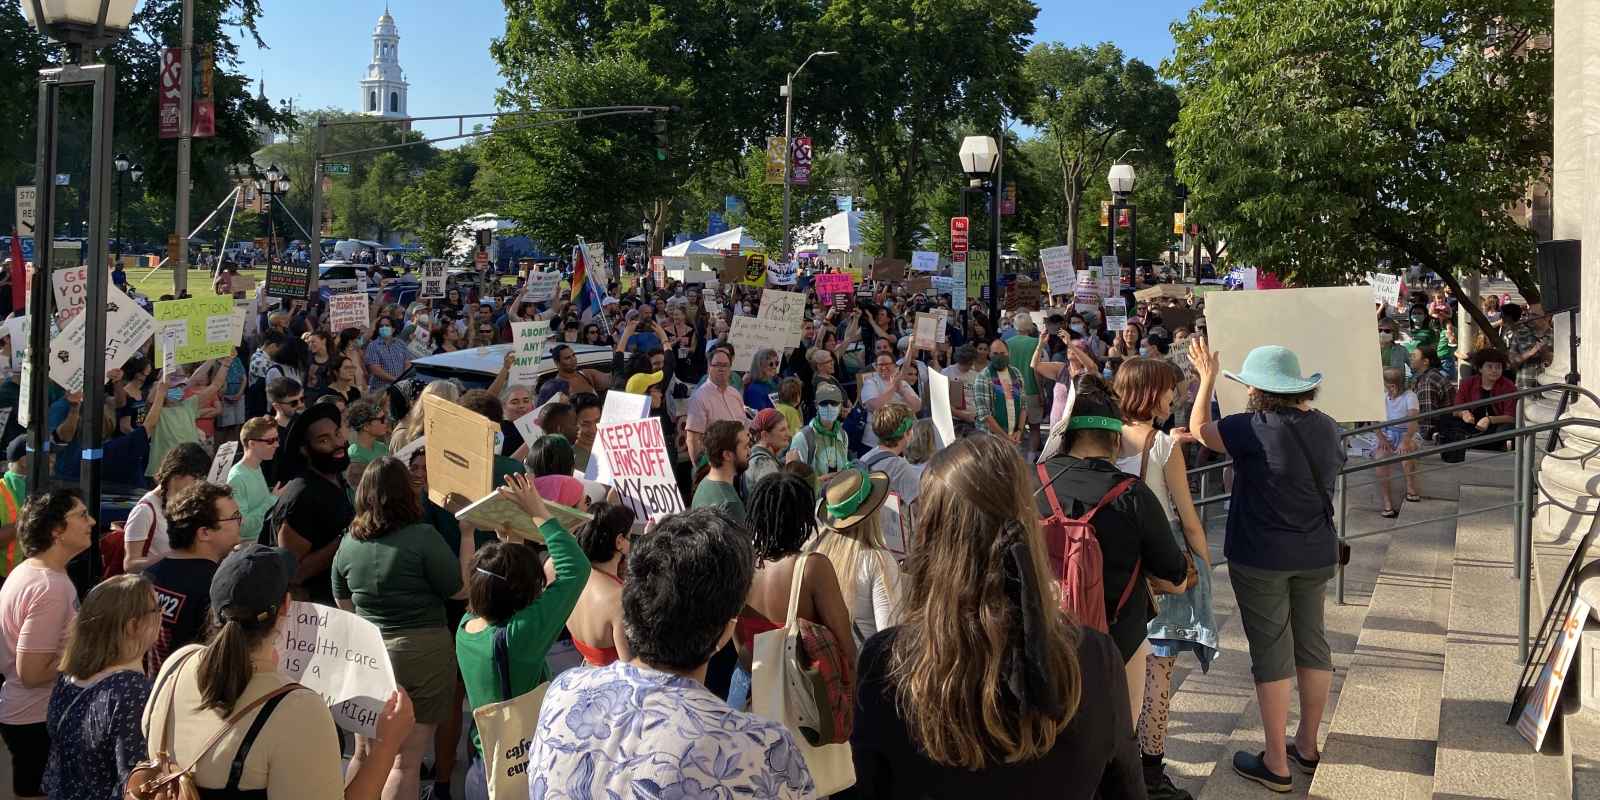 Protesters gather in New Haven after the US Supreme Court gutted Roe v Wade in the Dobbs decision. The sky is blue and clear, people are holding signs and trees are visible in the background